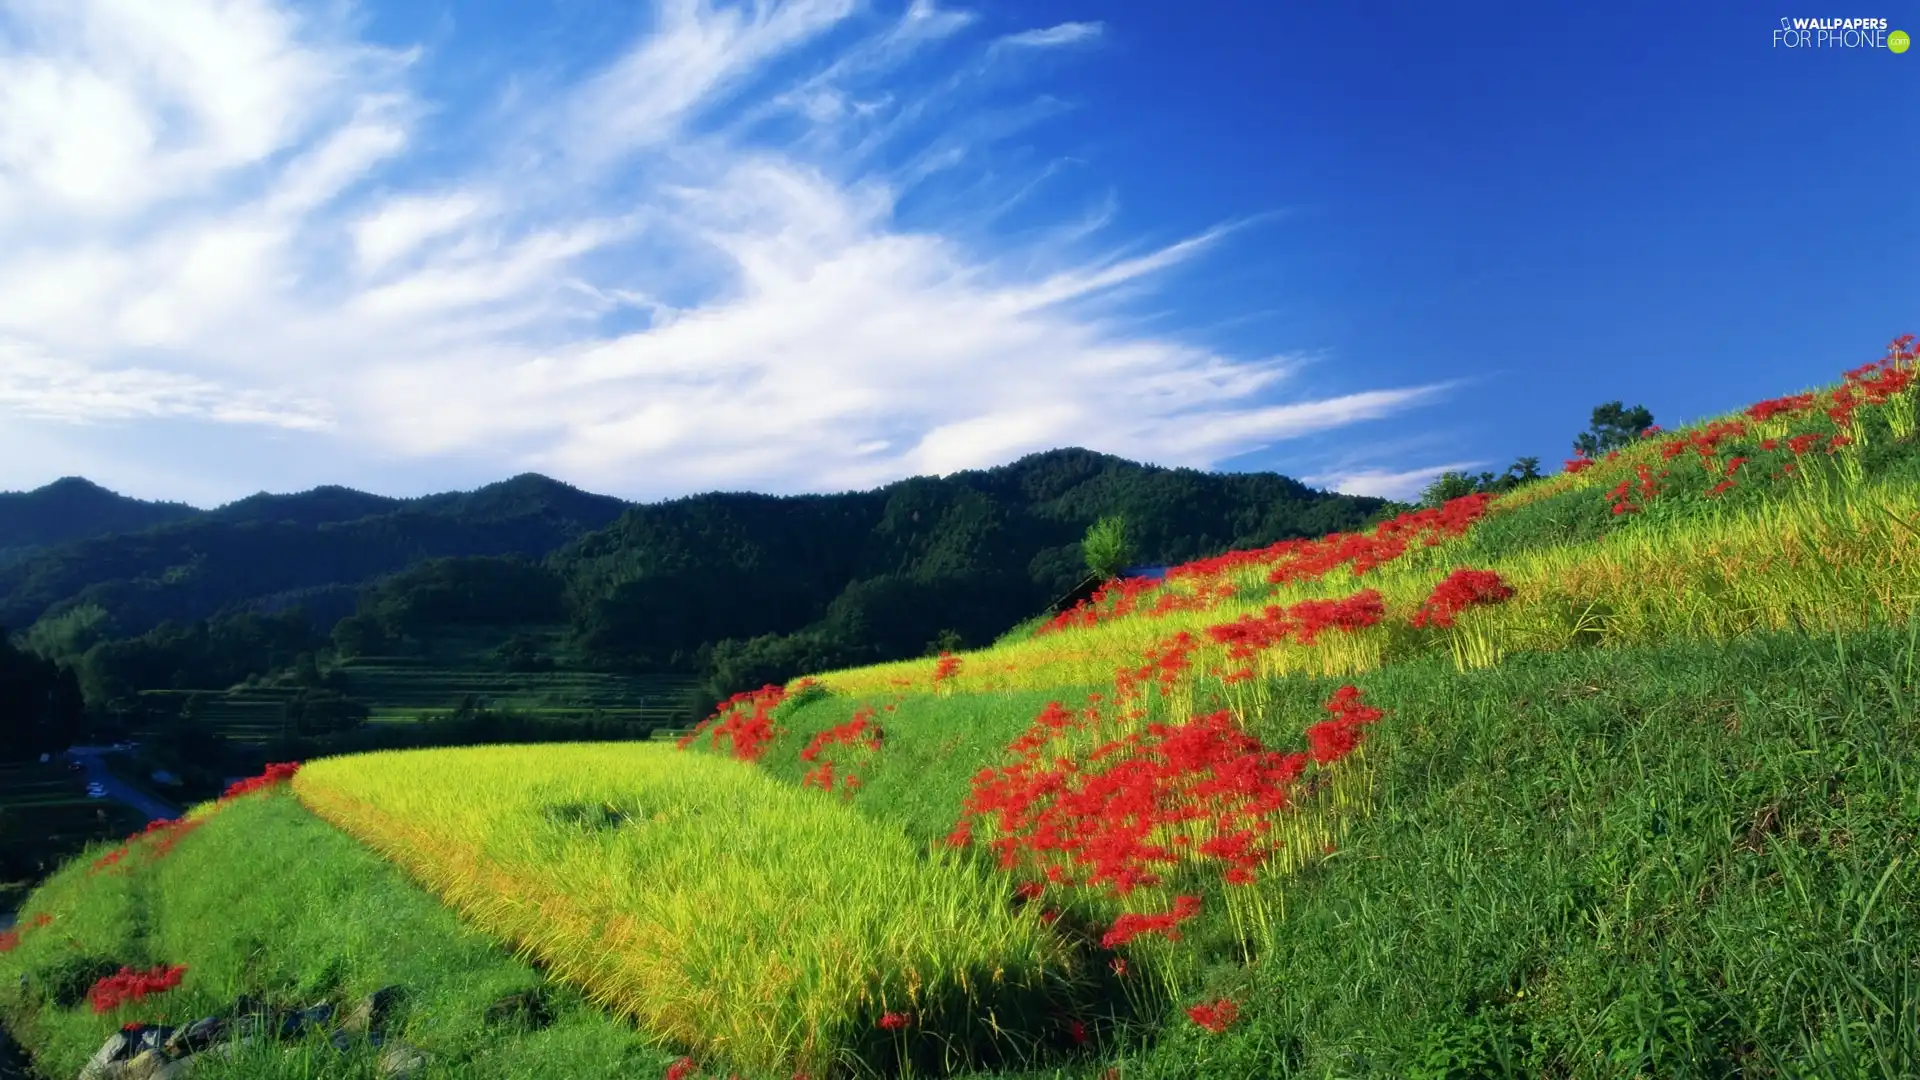 Mountains, Red, Flowers, Field